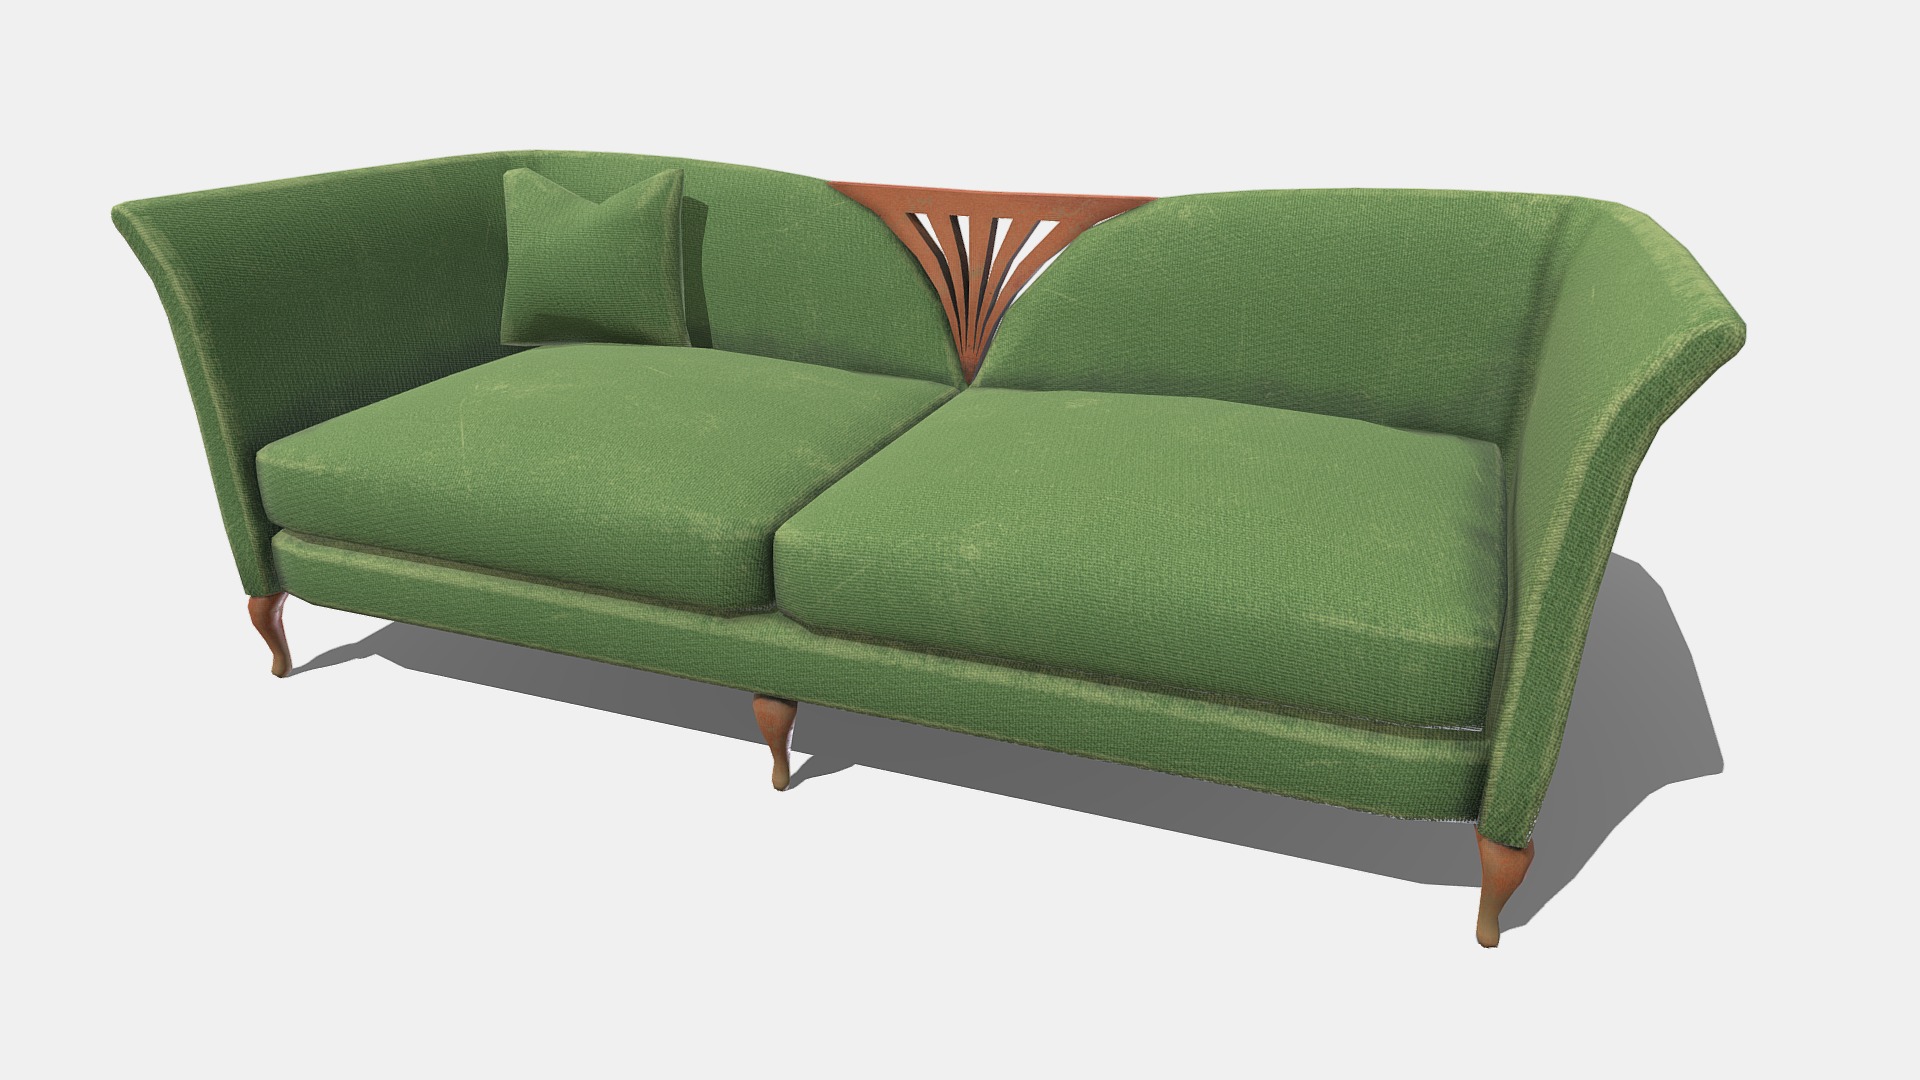 3D model Grand Couch - This is a 3D model of the Grand Couch. The 3D model is about a green and white couch.